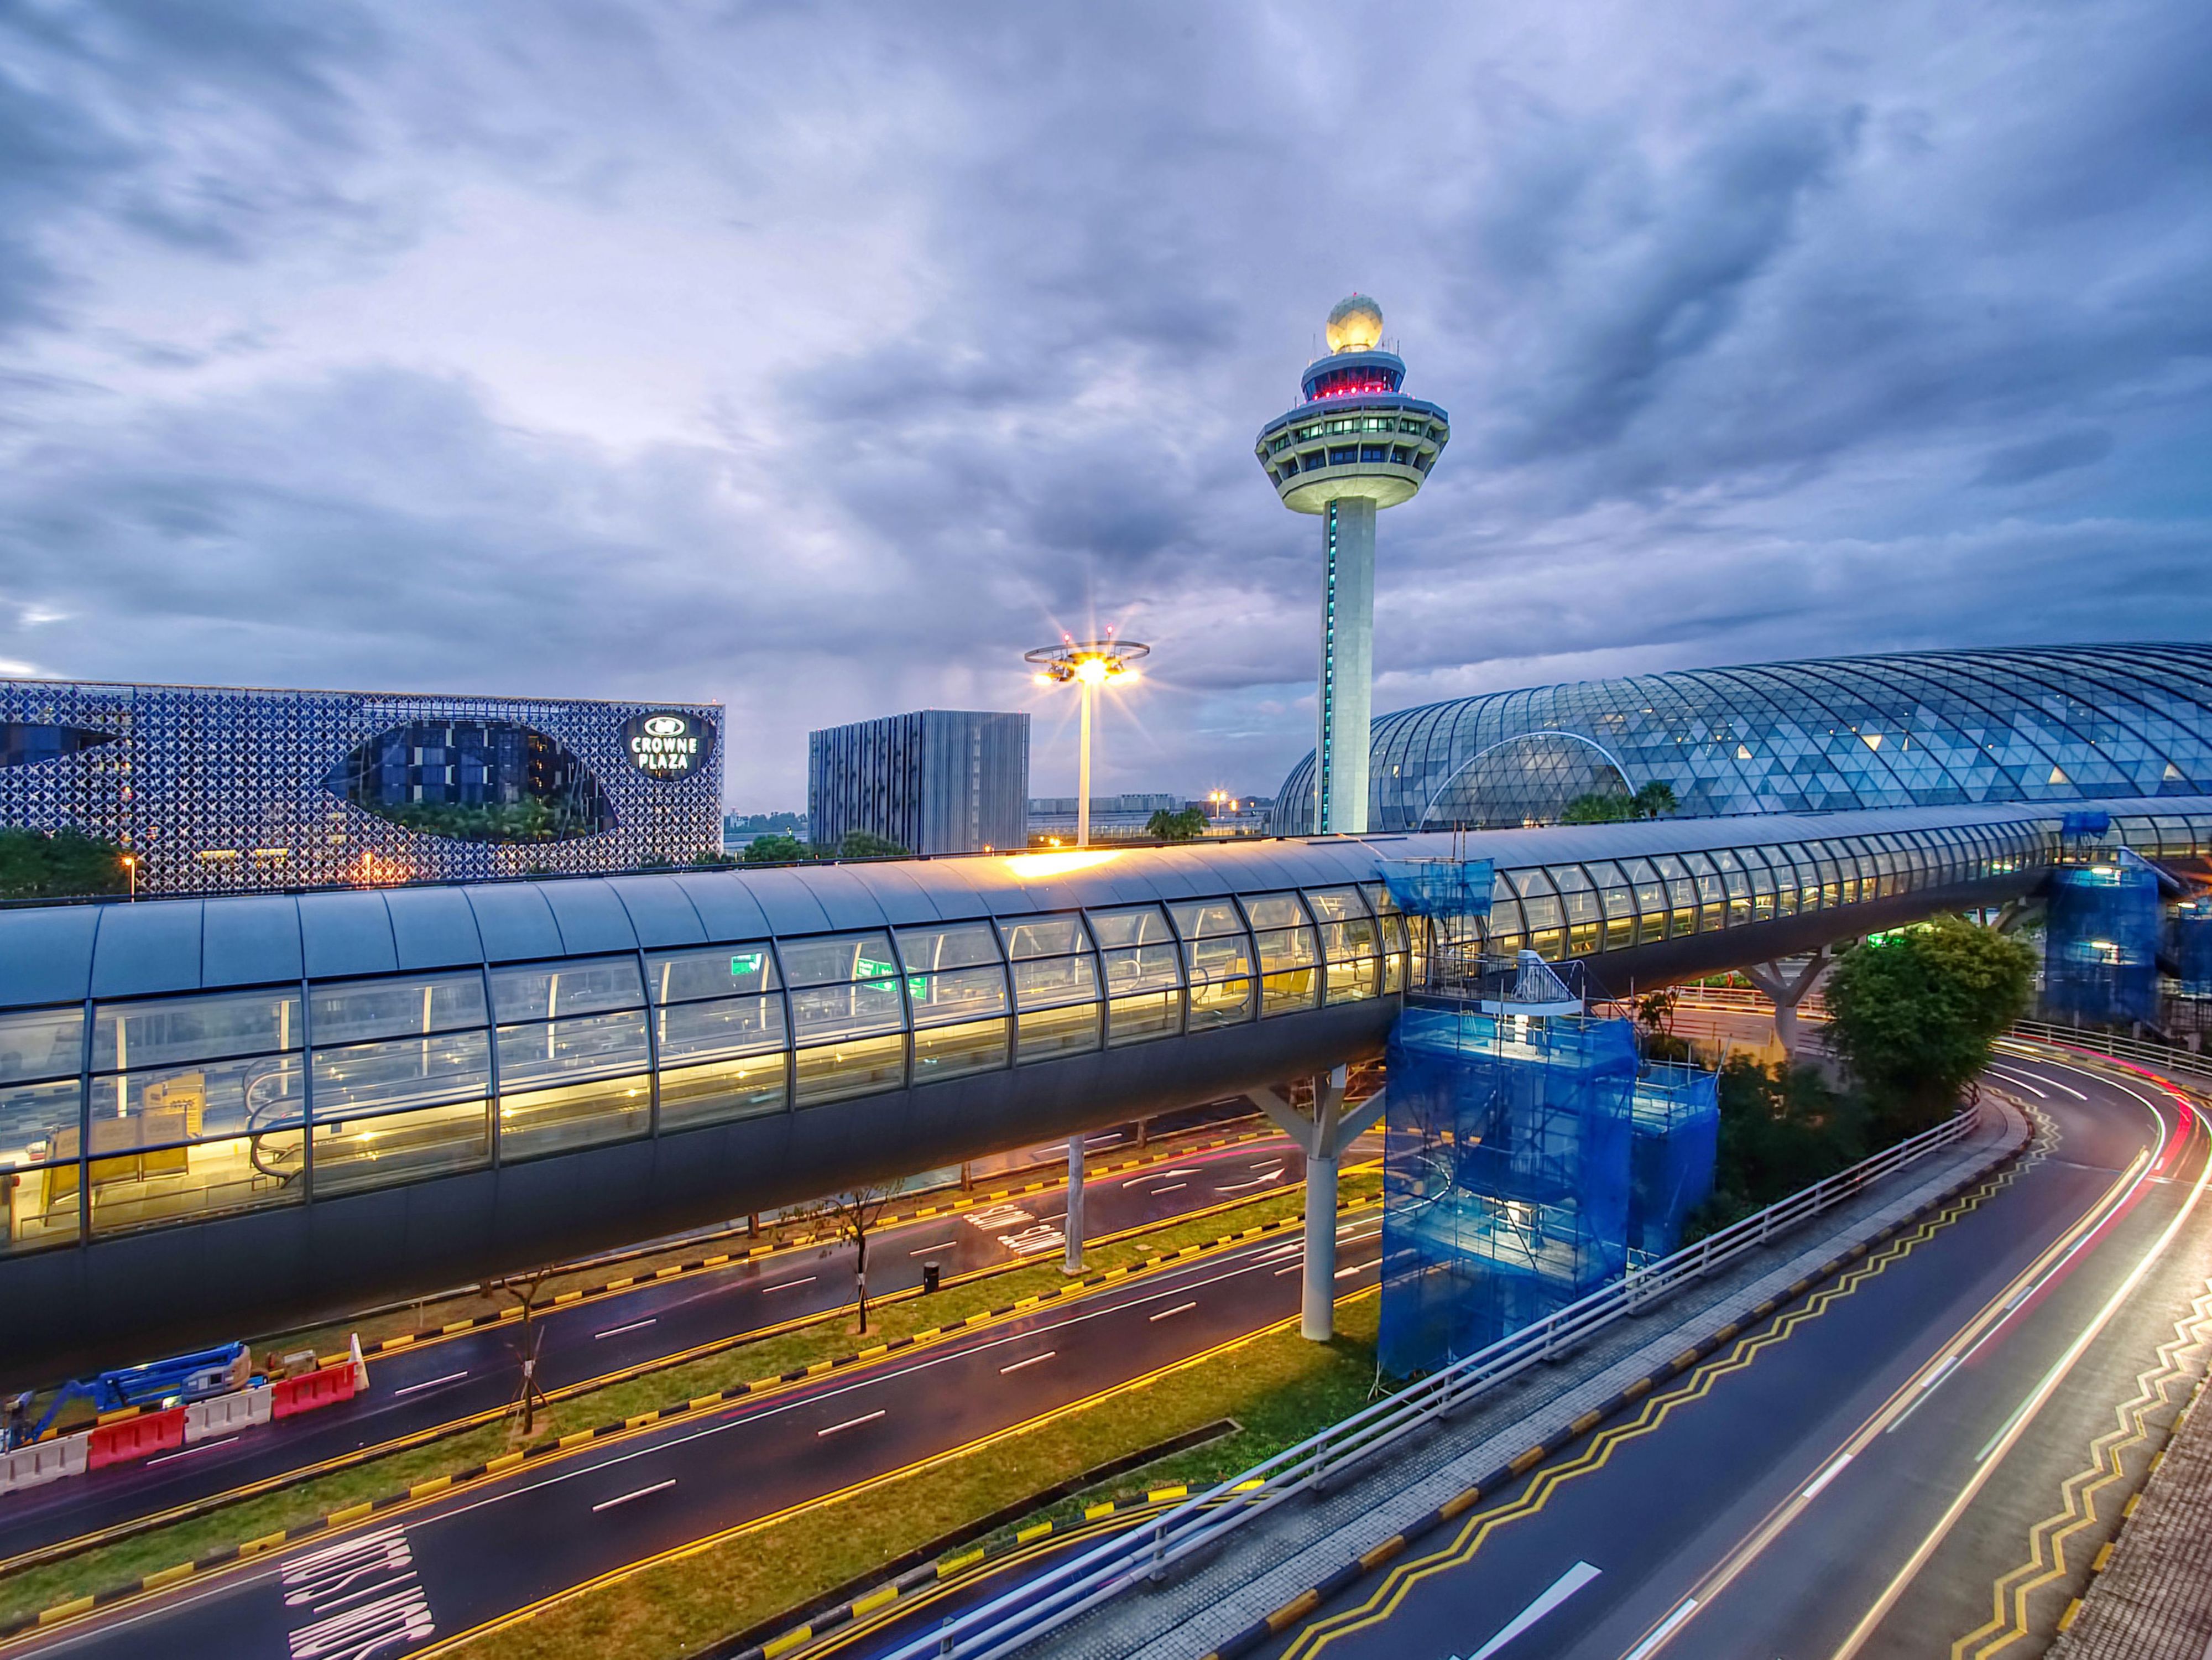 Crowne Plaza Changi Airport has once again earned top accolades at Skytrax’s 2023 World Airport Awards. The hotel clinched both 'World’s Best Airport Hotel' and 'Best Airport Hotel in Asia' for a remarkable eighth consecutive year at the annual awards list, which represents the benchmark of excellence in the world airport industry.